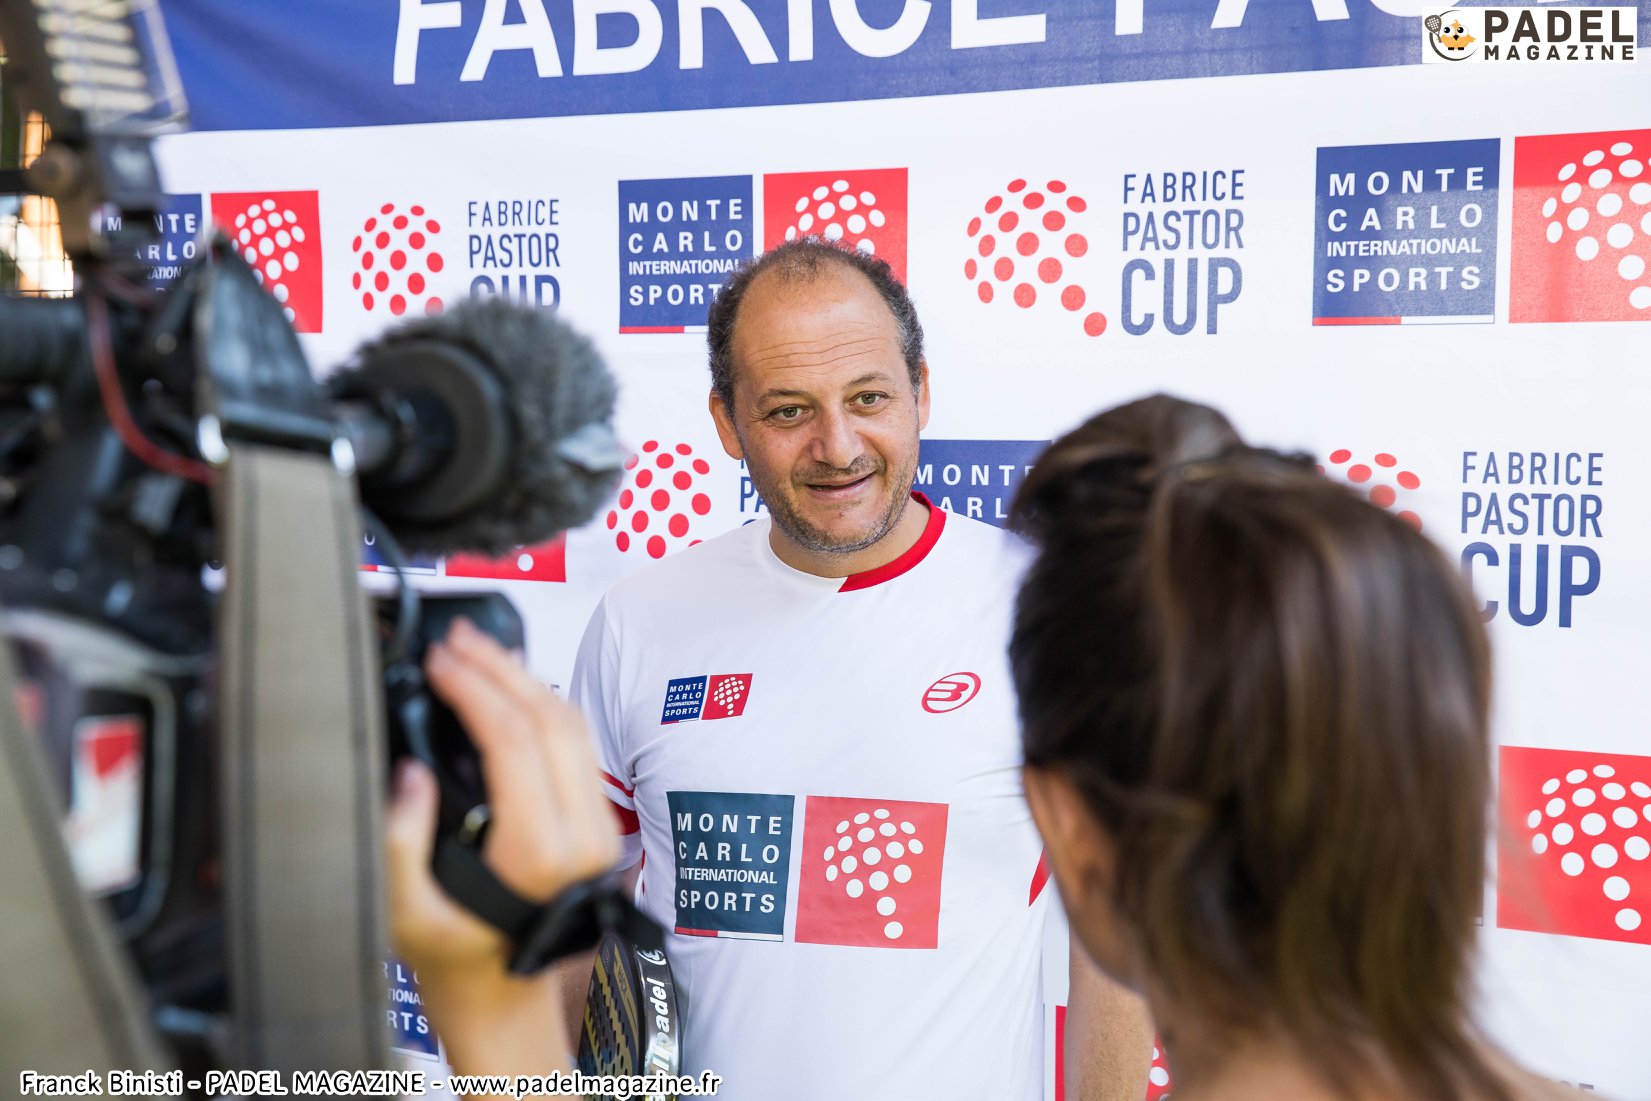 Fabrice pastor cup francia